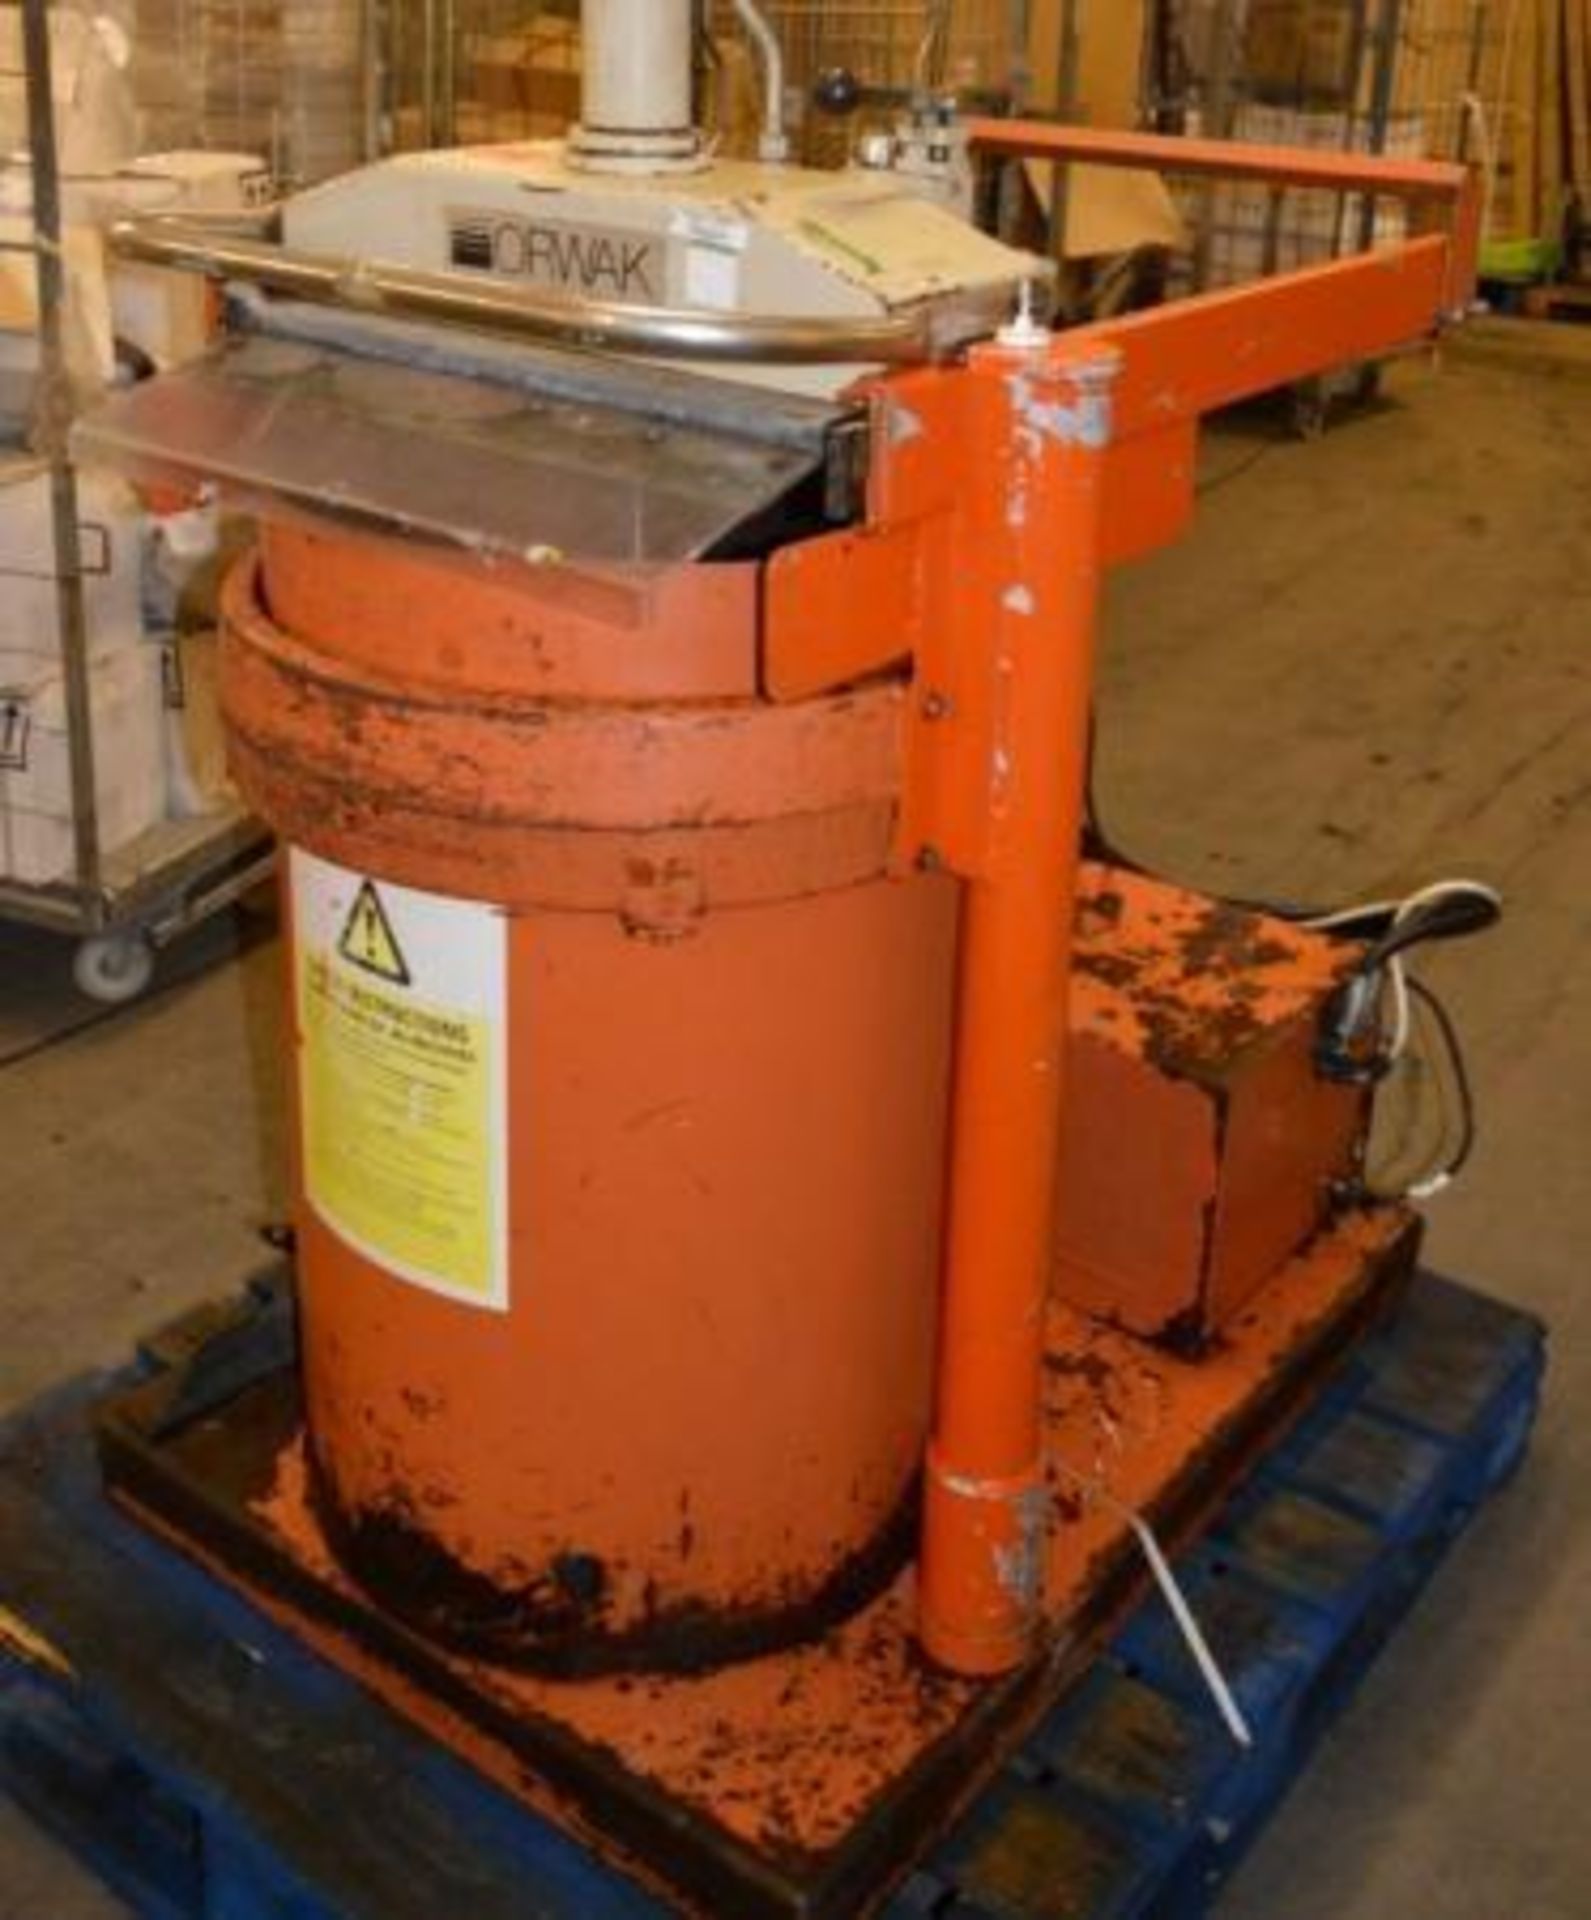 1 x Orwak 5030 Waste Compactor Bailer - Pre-owned For Compacting Recyclable or Non-Recyclable Waste - Image 2 of 4